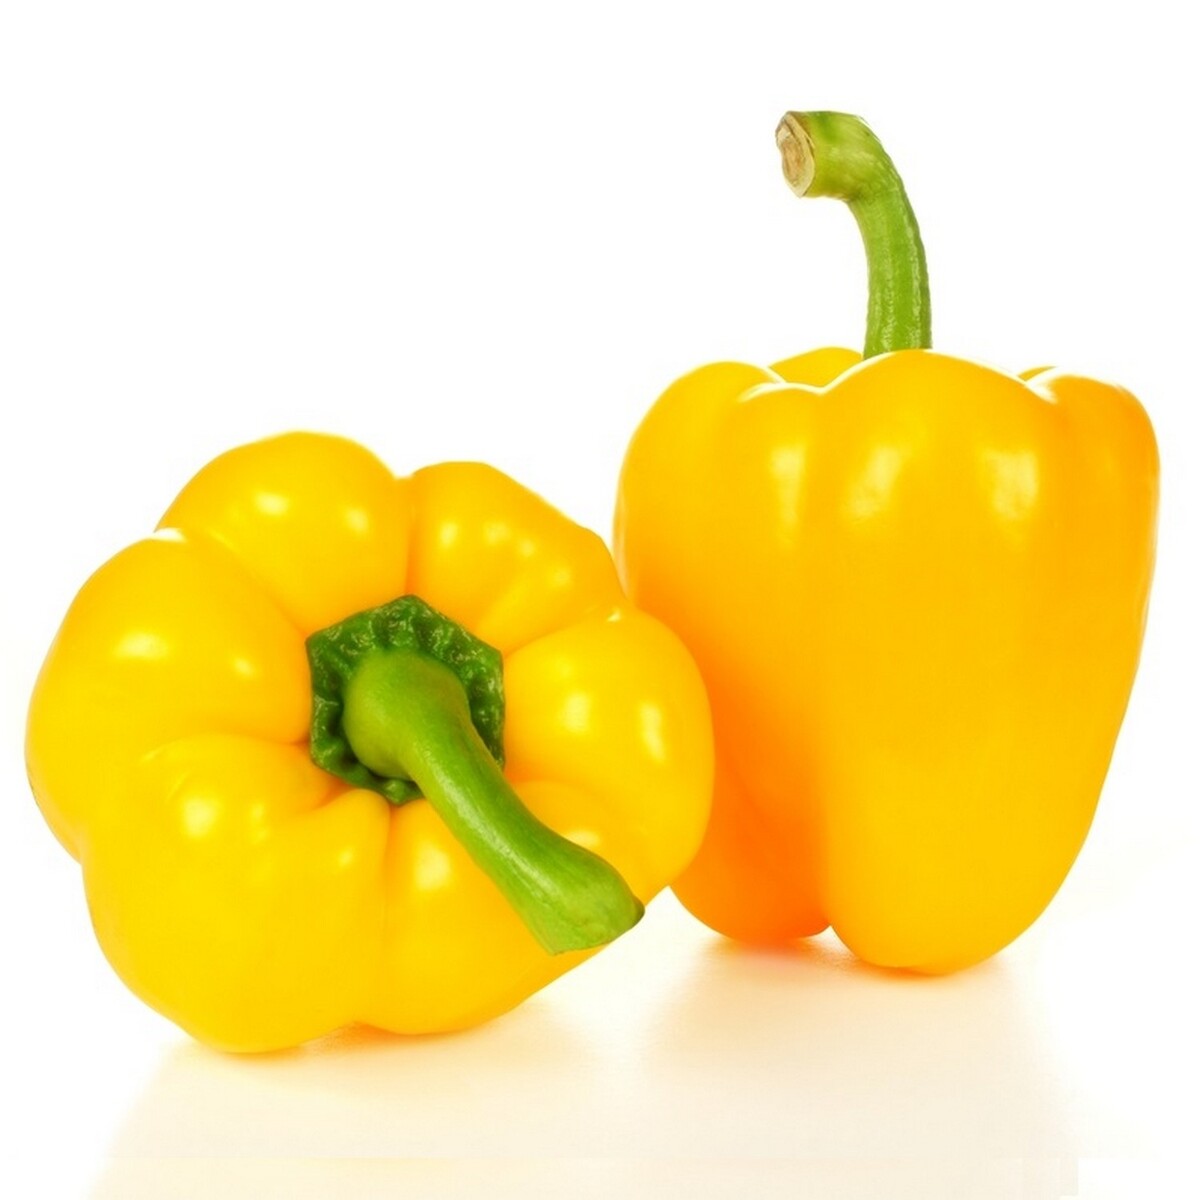 Capsicum Yellow Approx. 500g